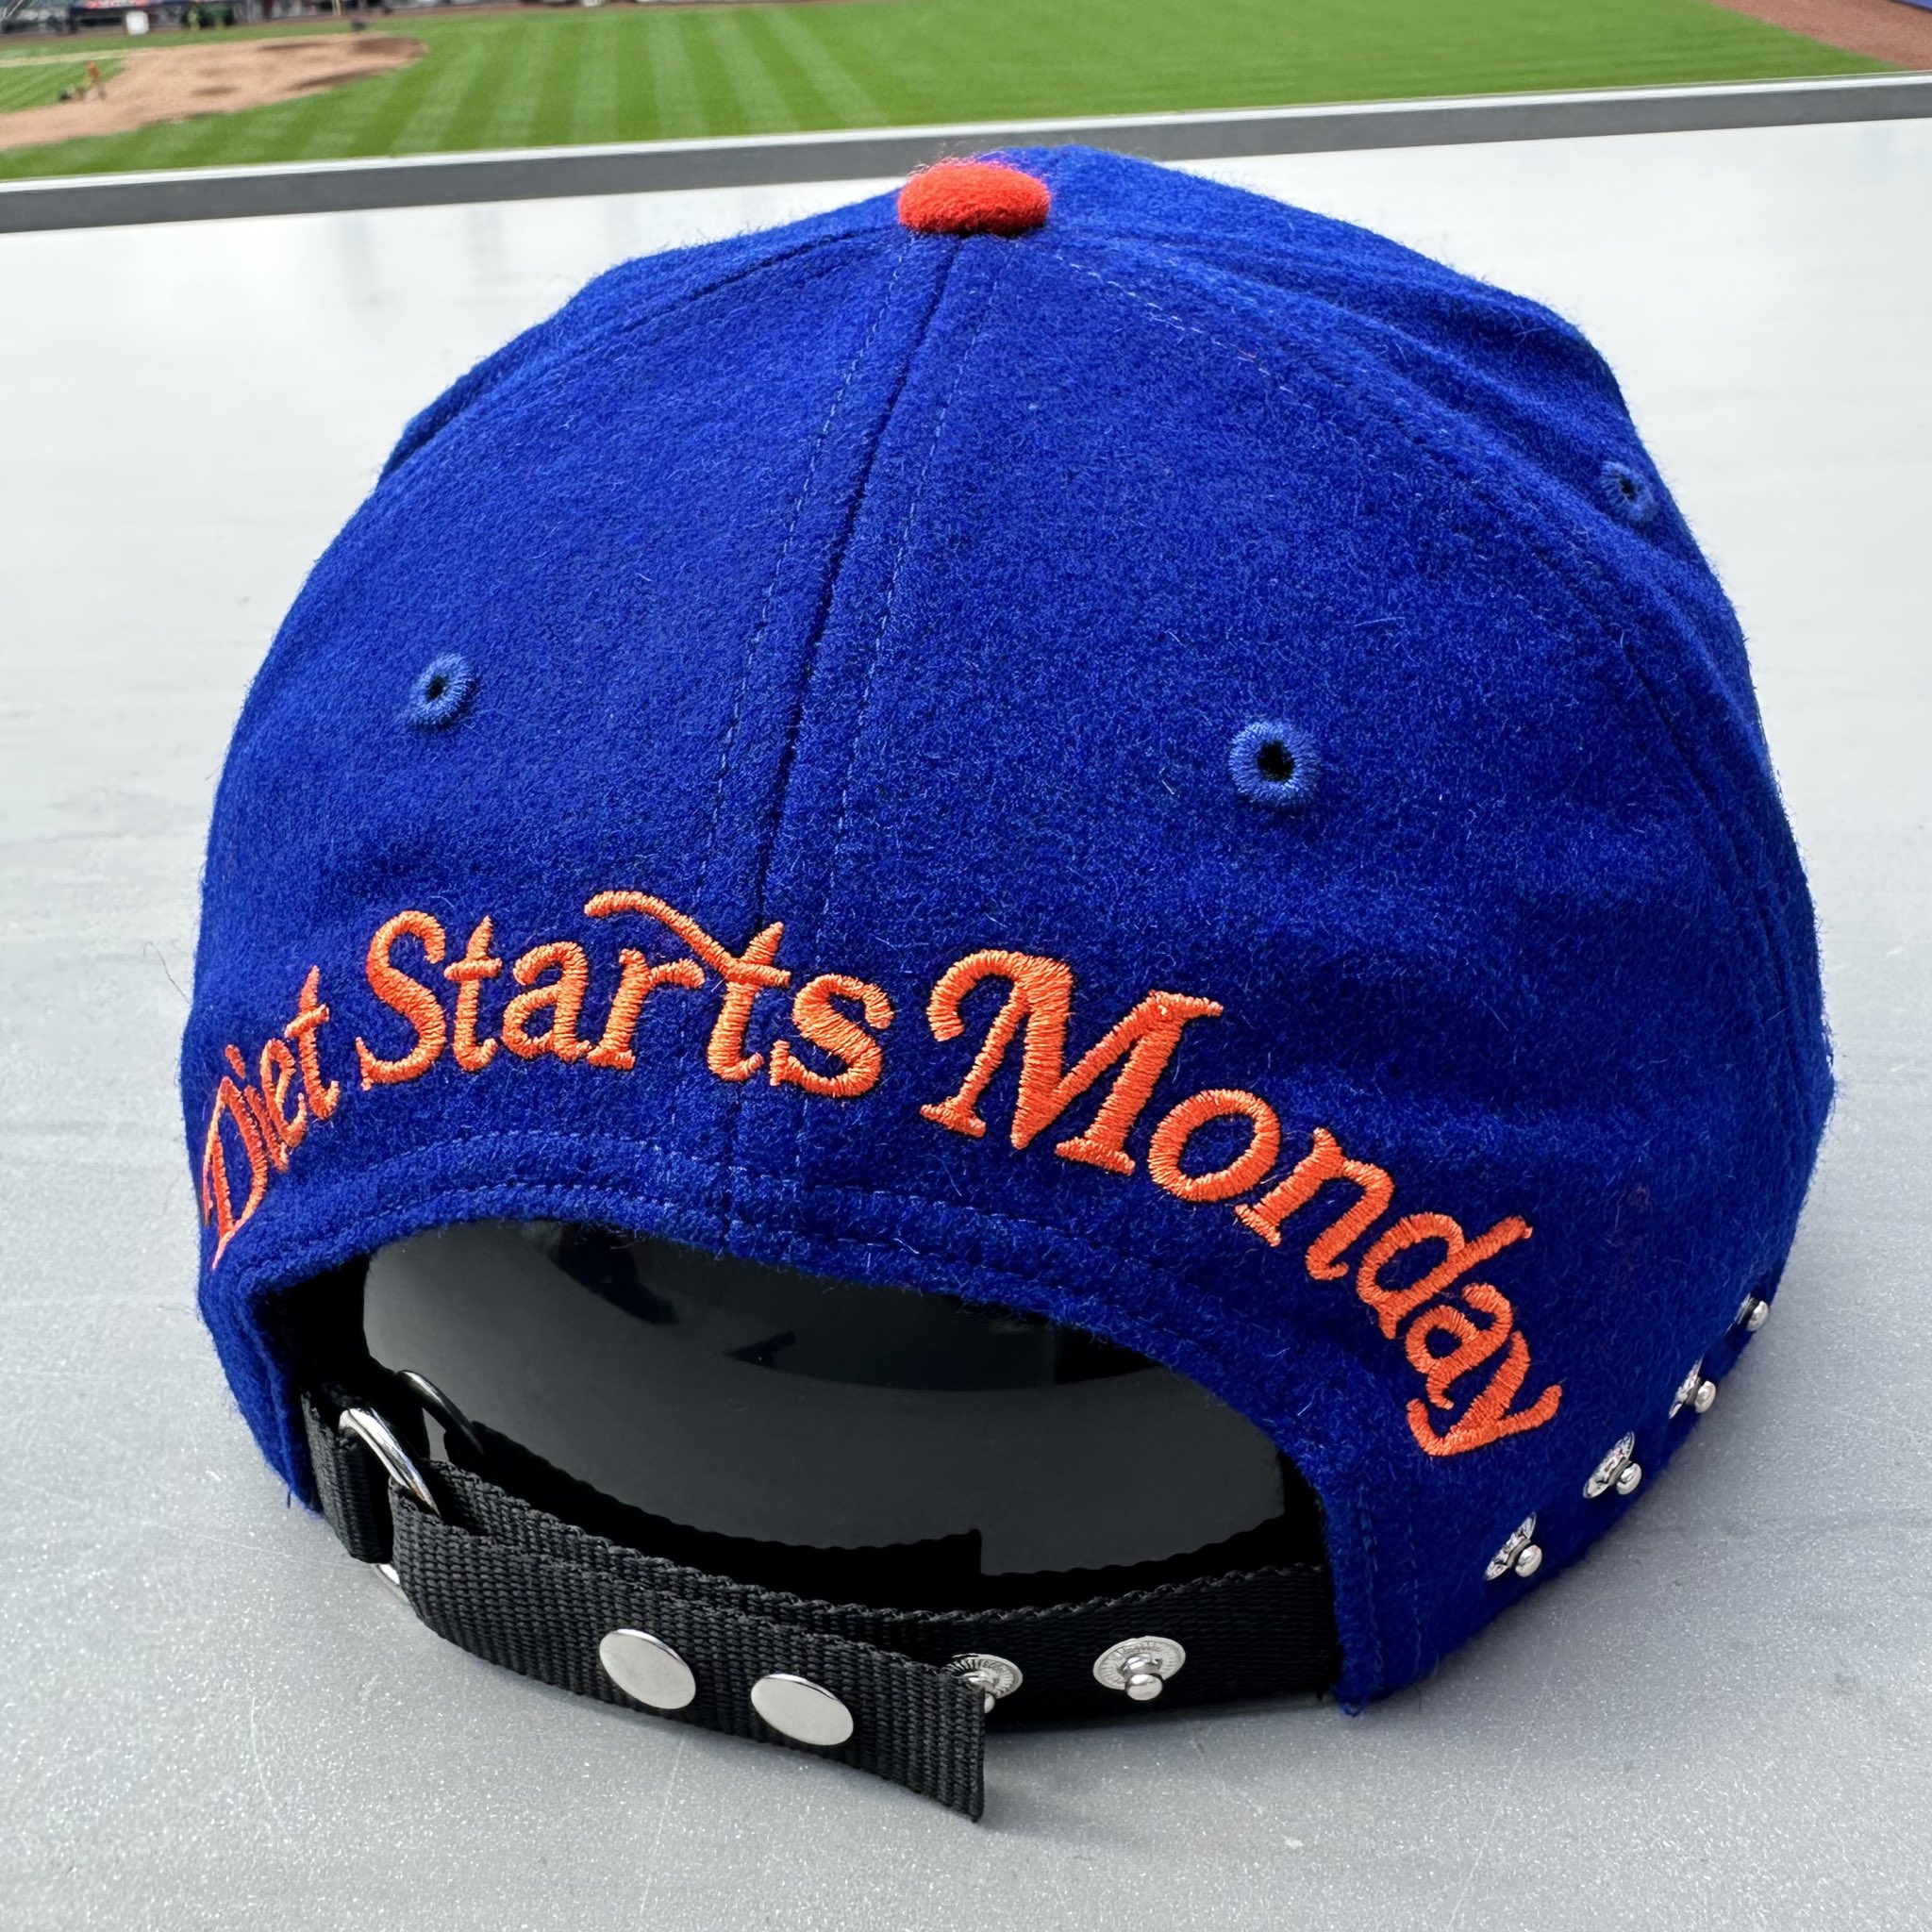 Mets Team Store on X: Ready to go! @Mets @CitiField #OpeningDay #Mets # teamstore #LGM #NYM #CitiField  / X